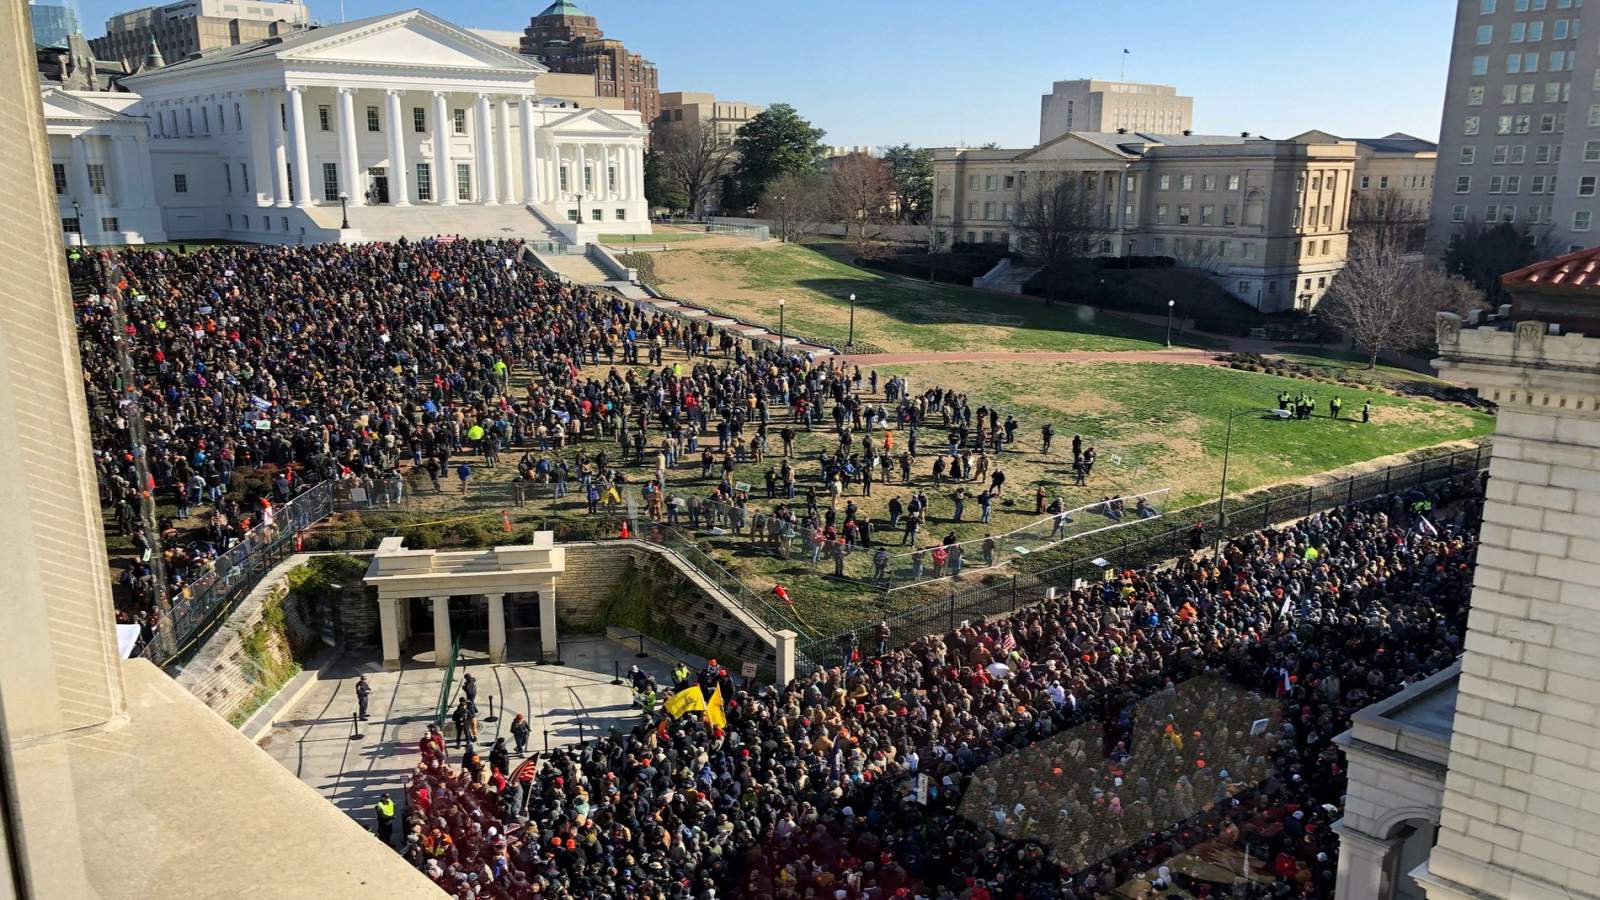 One arrest made as more than 20,000 descend on Richmond for Lobby Day, pro-gun rally